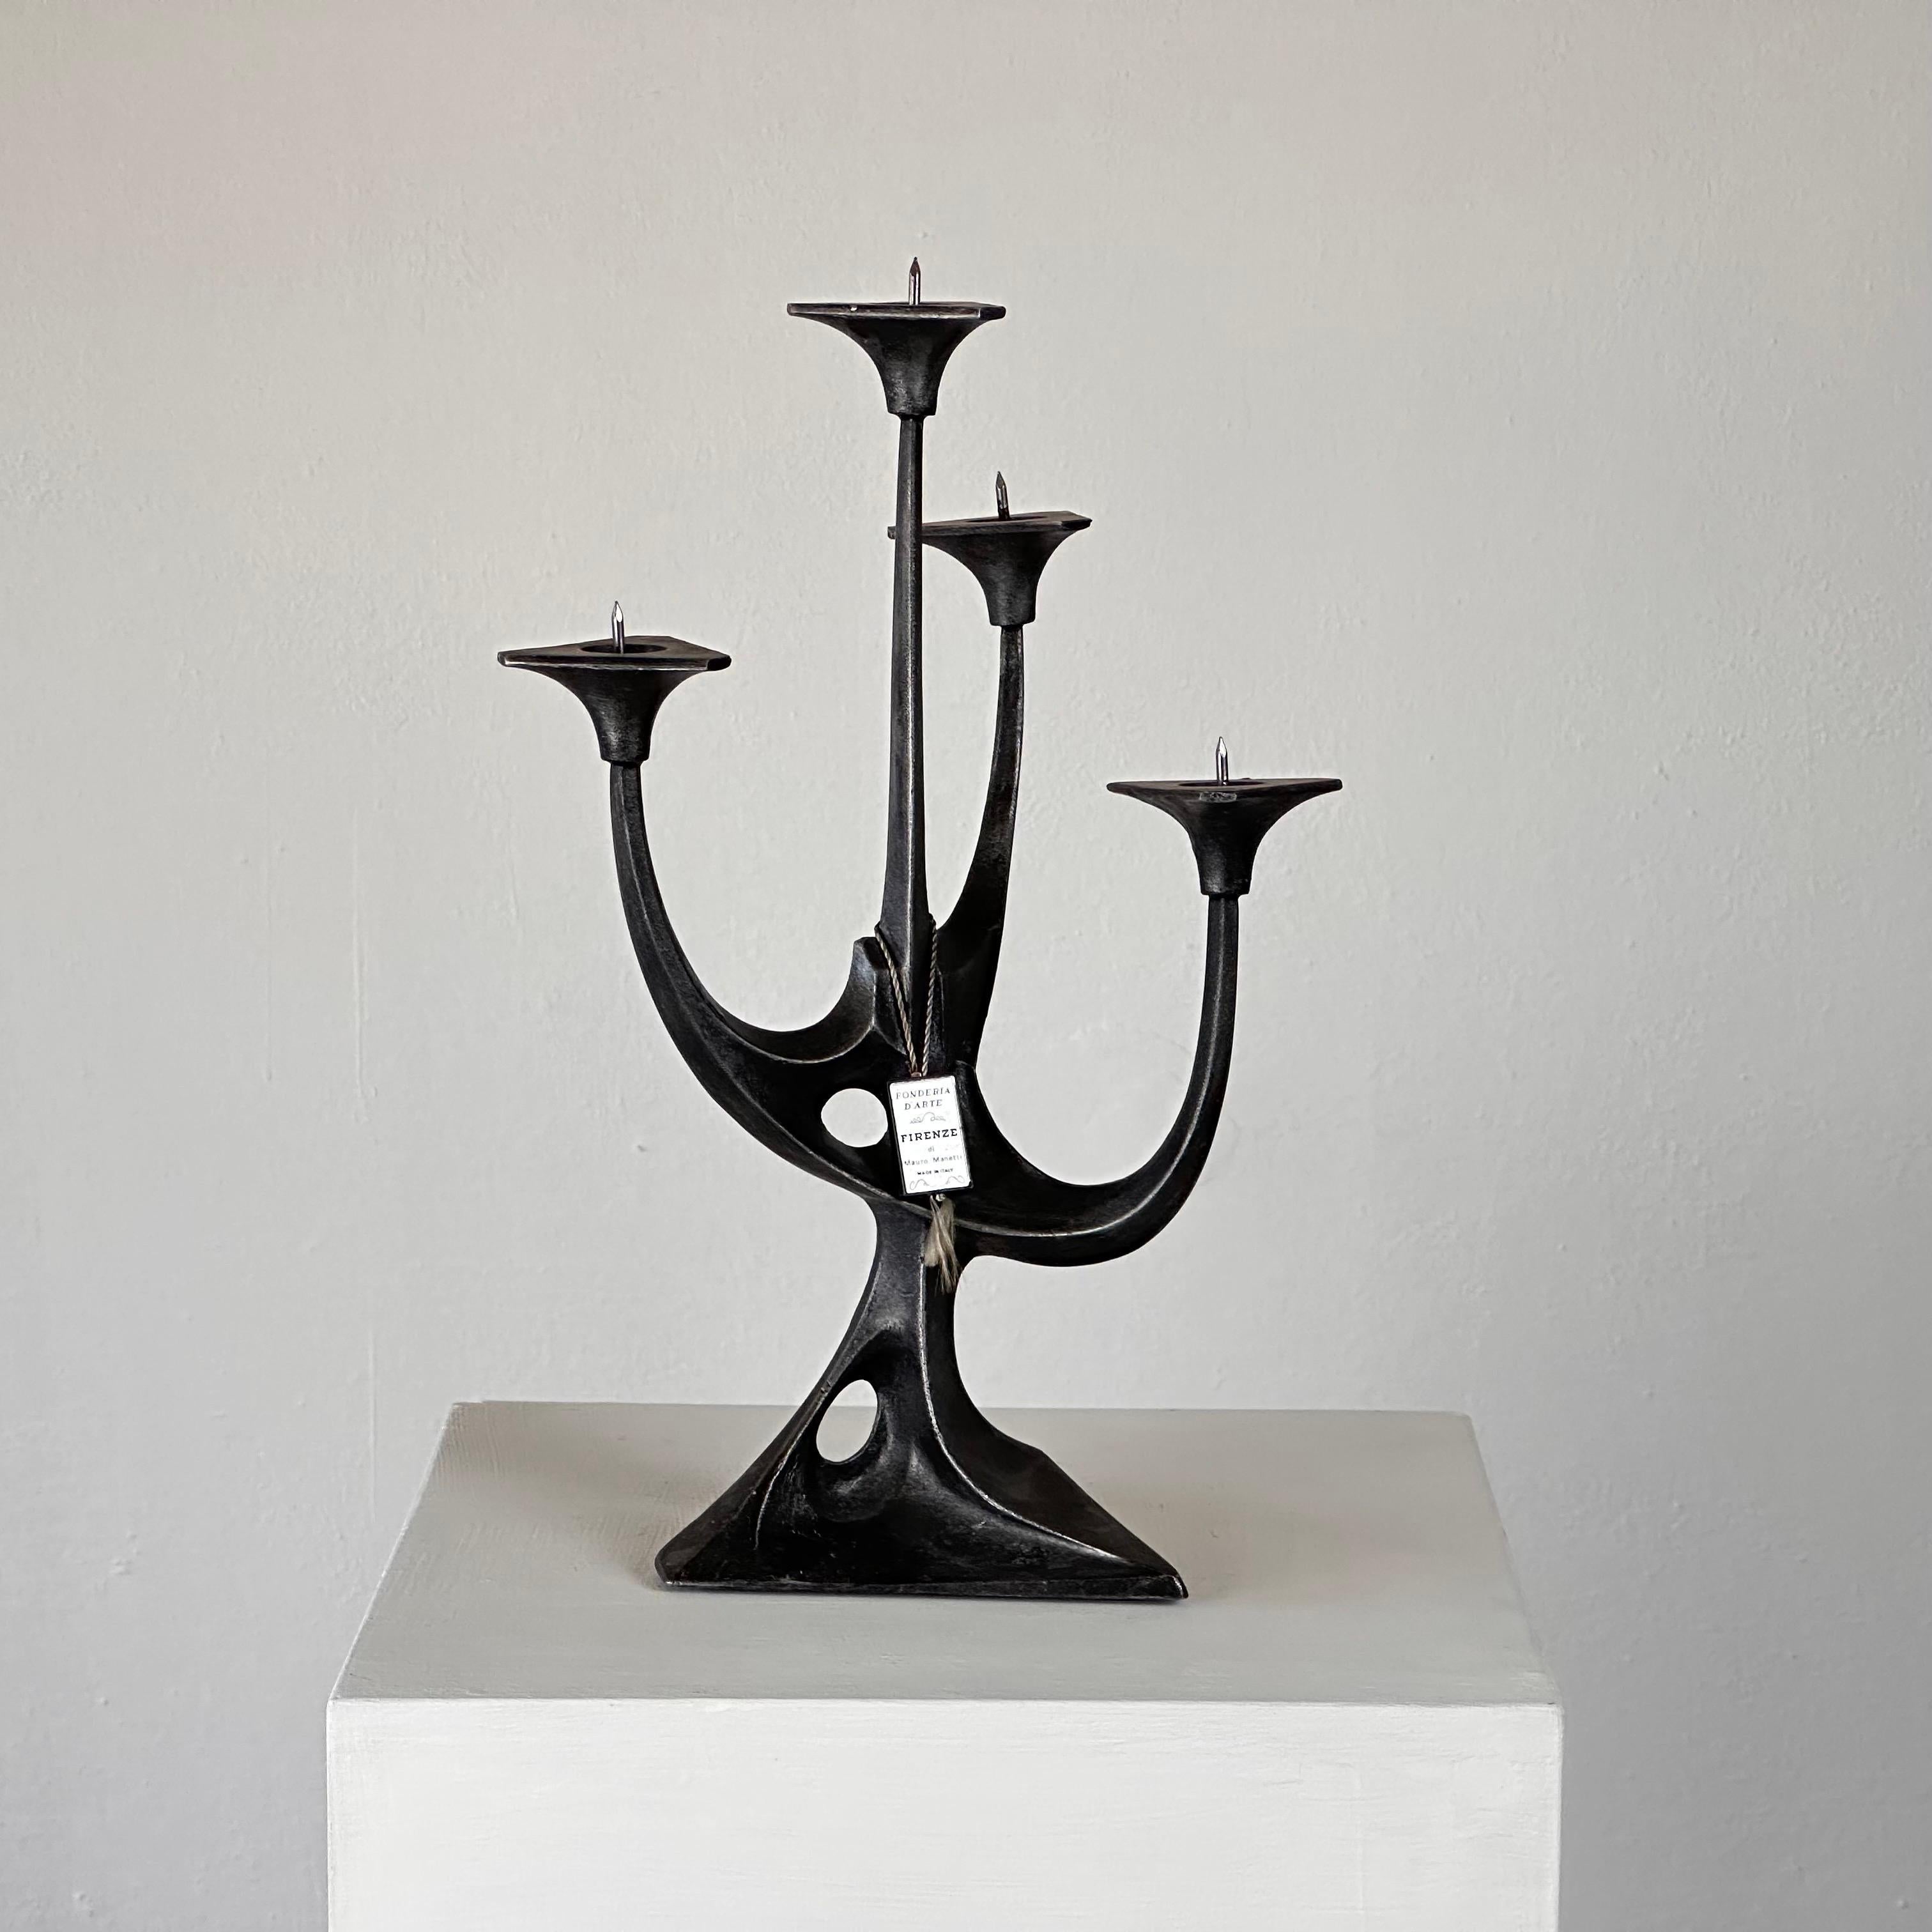 Elevate your space with this stunning Sculptural Candelabra, a true gem crafted by the renowned Mauro Manetti for Fonderia d'Arte Firenze in the 1960s. Immerse yourself in the allure of Italian mid-century design with this exceptional piece that